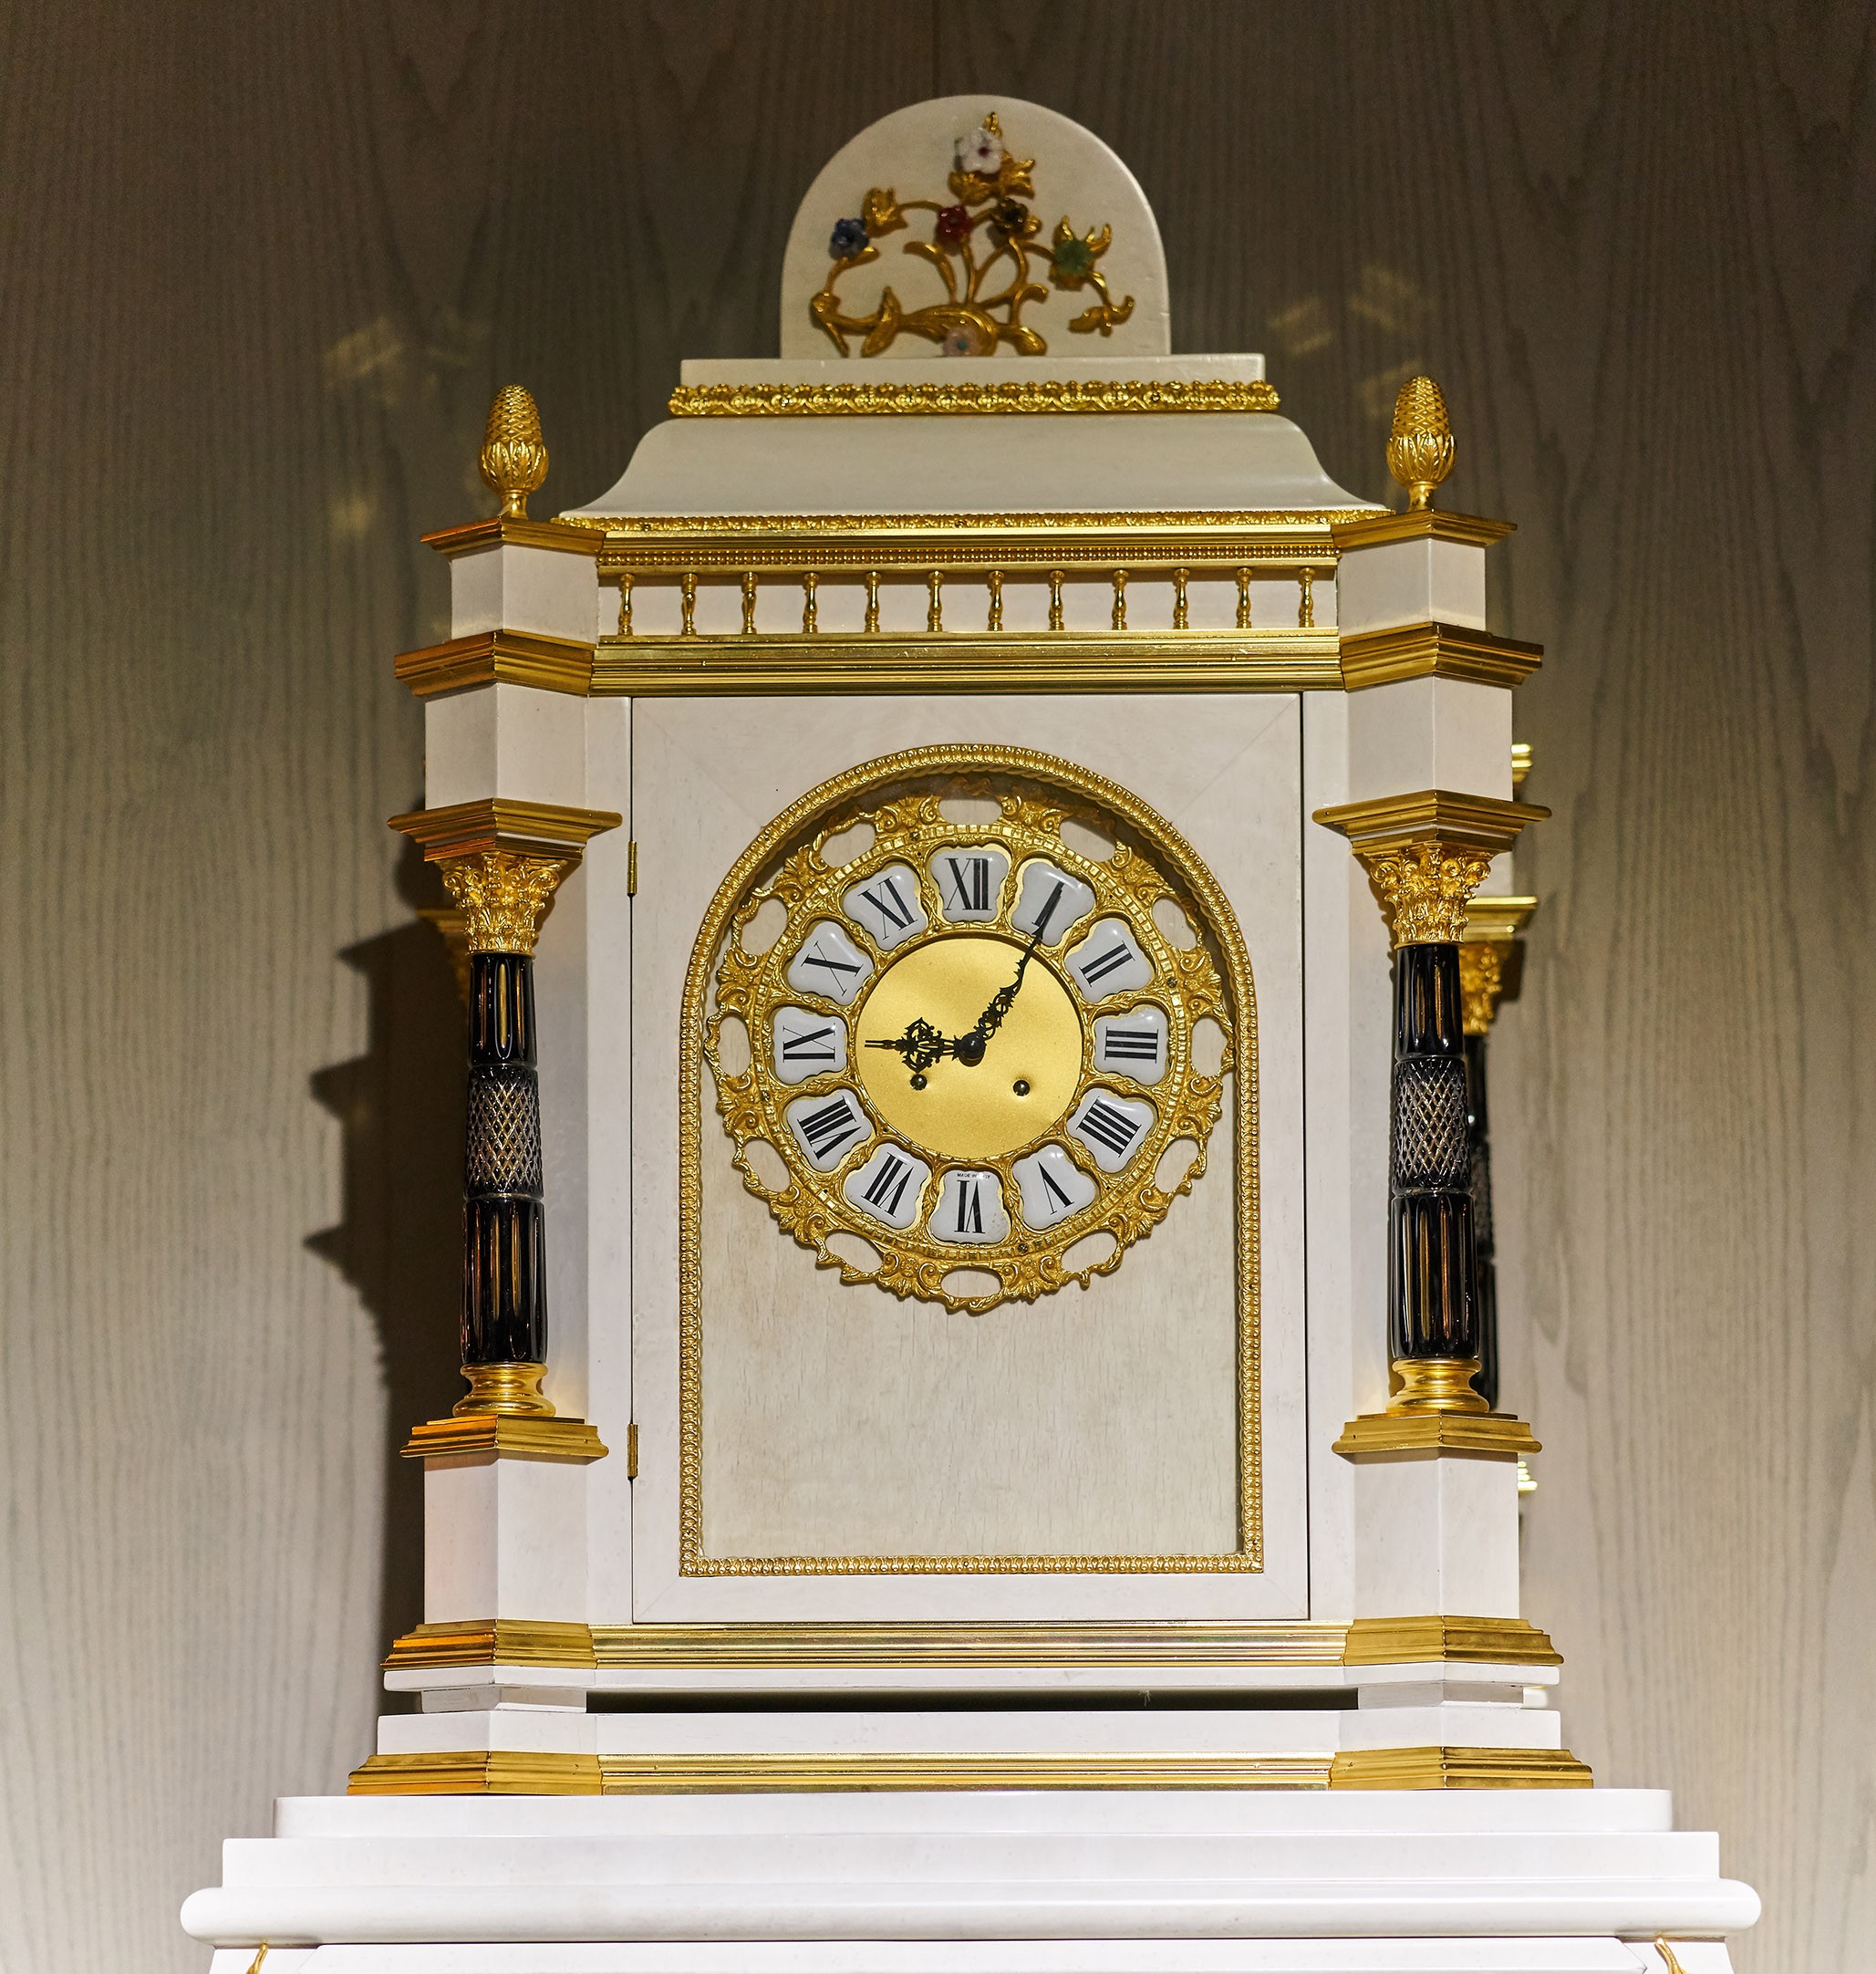 Floor Clocks Luxurious Golden Angelic Grandfather Clock from our furniture showpiece collection. 7370